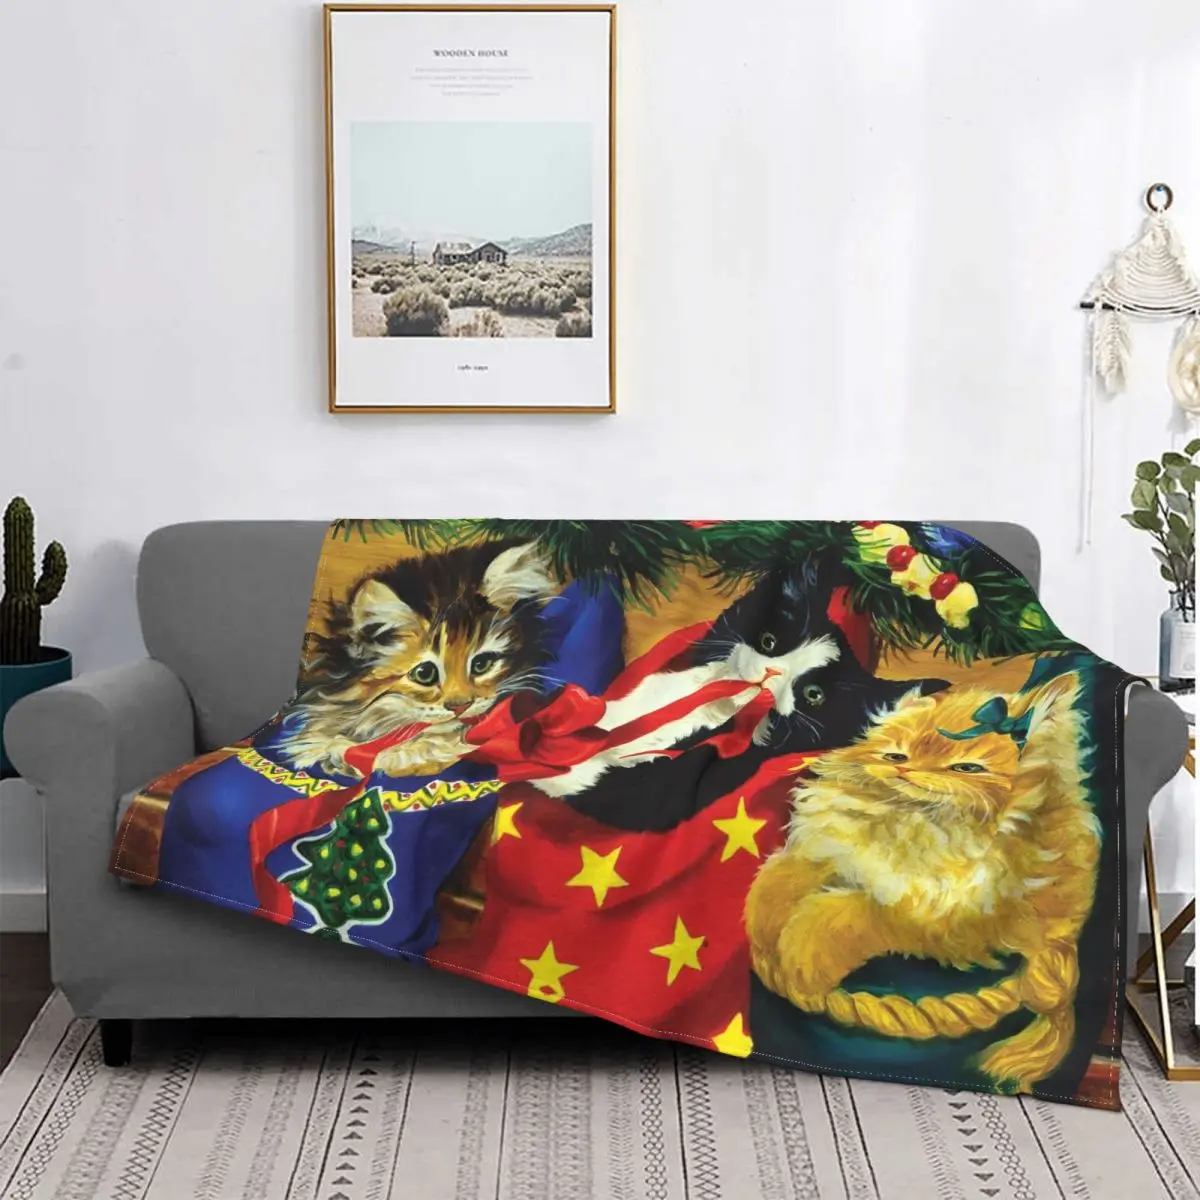 

Merry Christmas Knitted Blankets New Year Cute Cat Fleece Throw Blanket Airplane Travel Decoration Soft Warm Bedspread